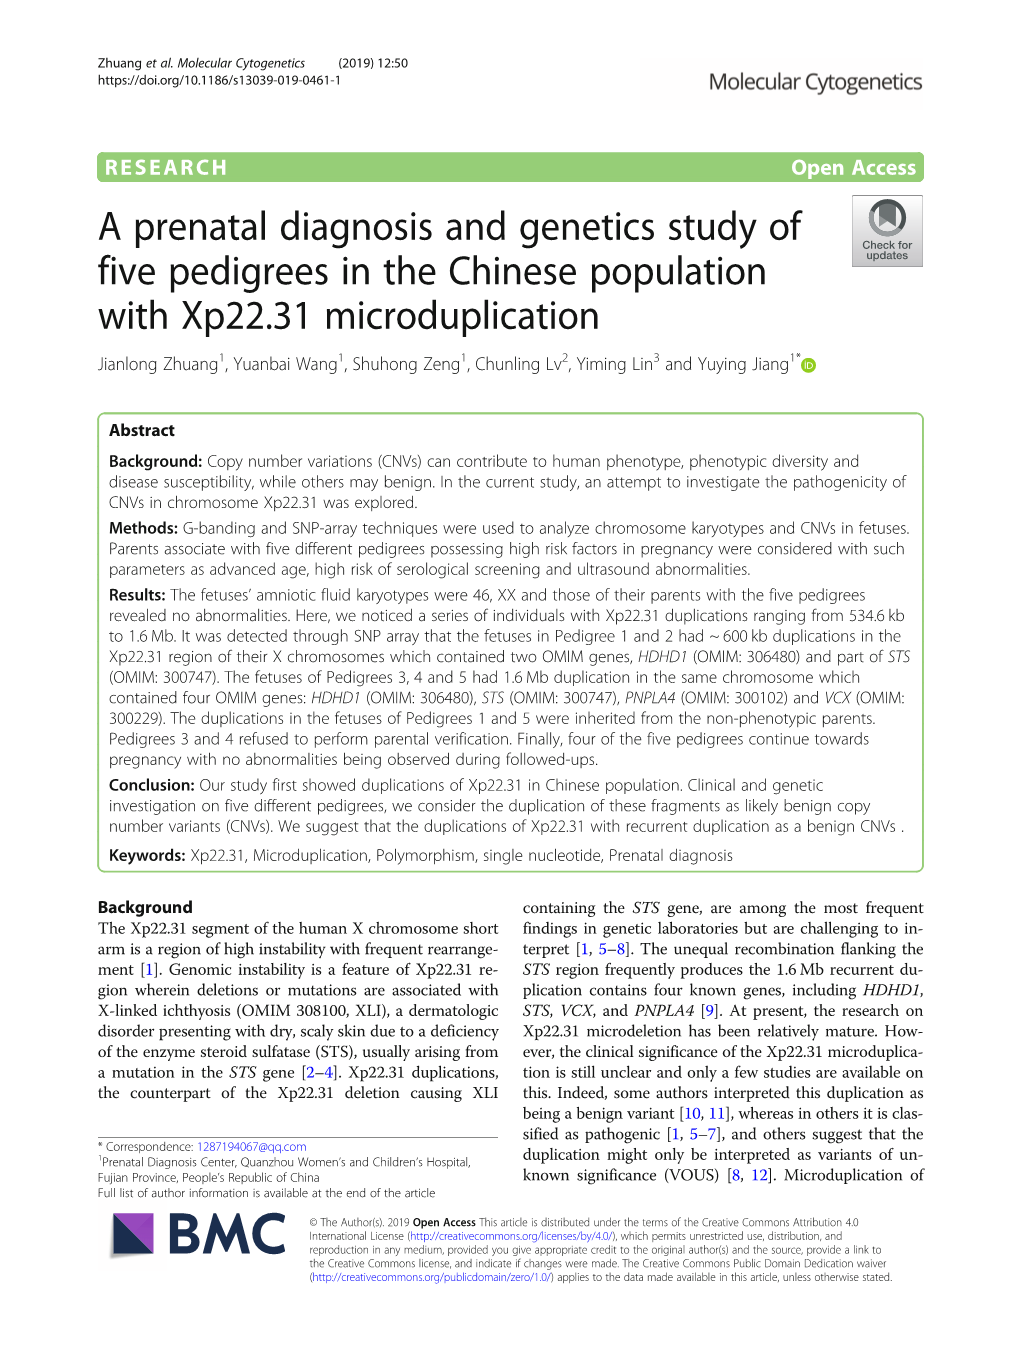 A Prenatal Diagnosis and Genetics Study of Five Pedigrees in the Chinese Population with Xp22.31 Microduplication